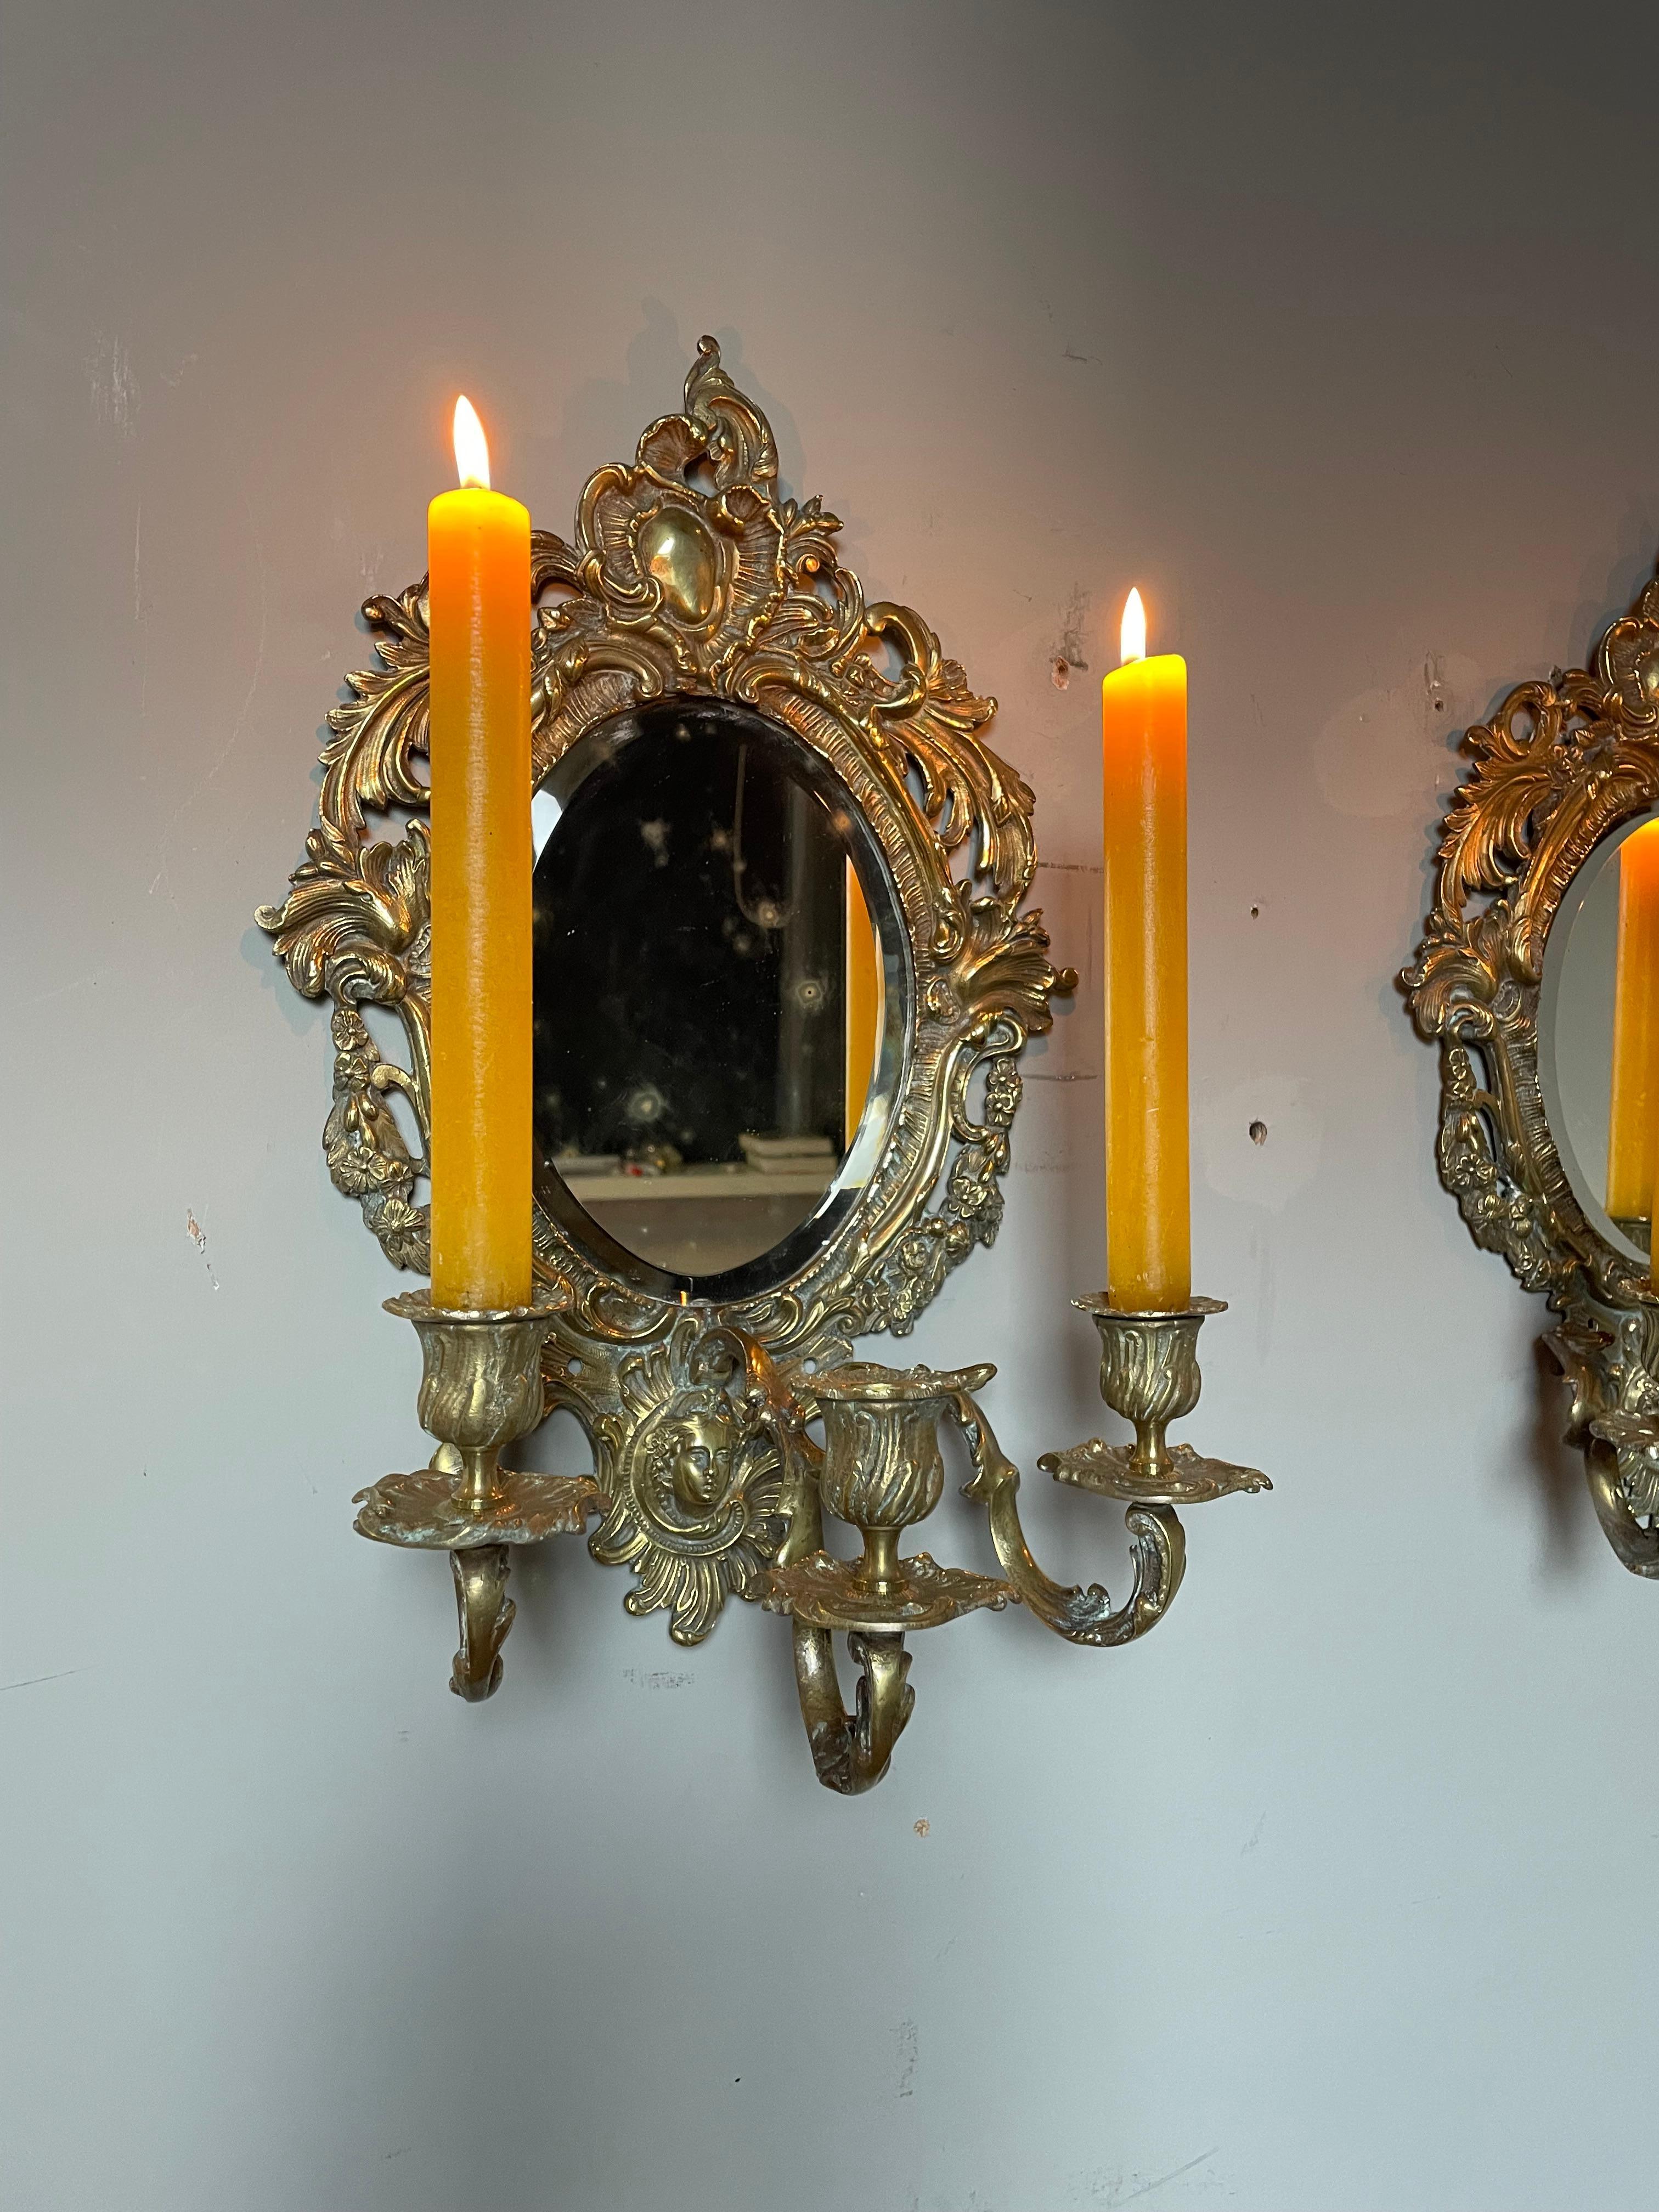 Antique Pair of Bronze Wall Sconce Candelabras w. Beveled Mirrors & Goddess Mask For Sale 11